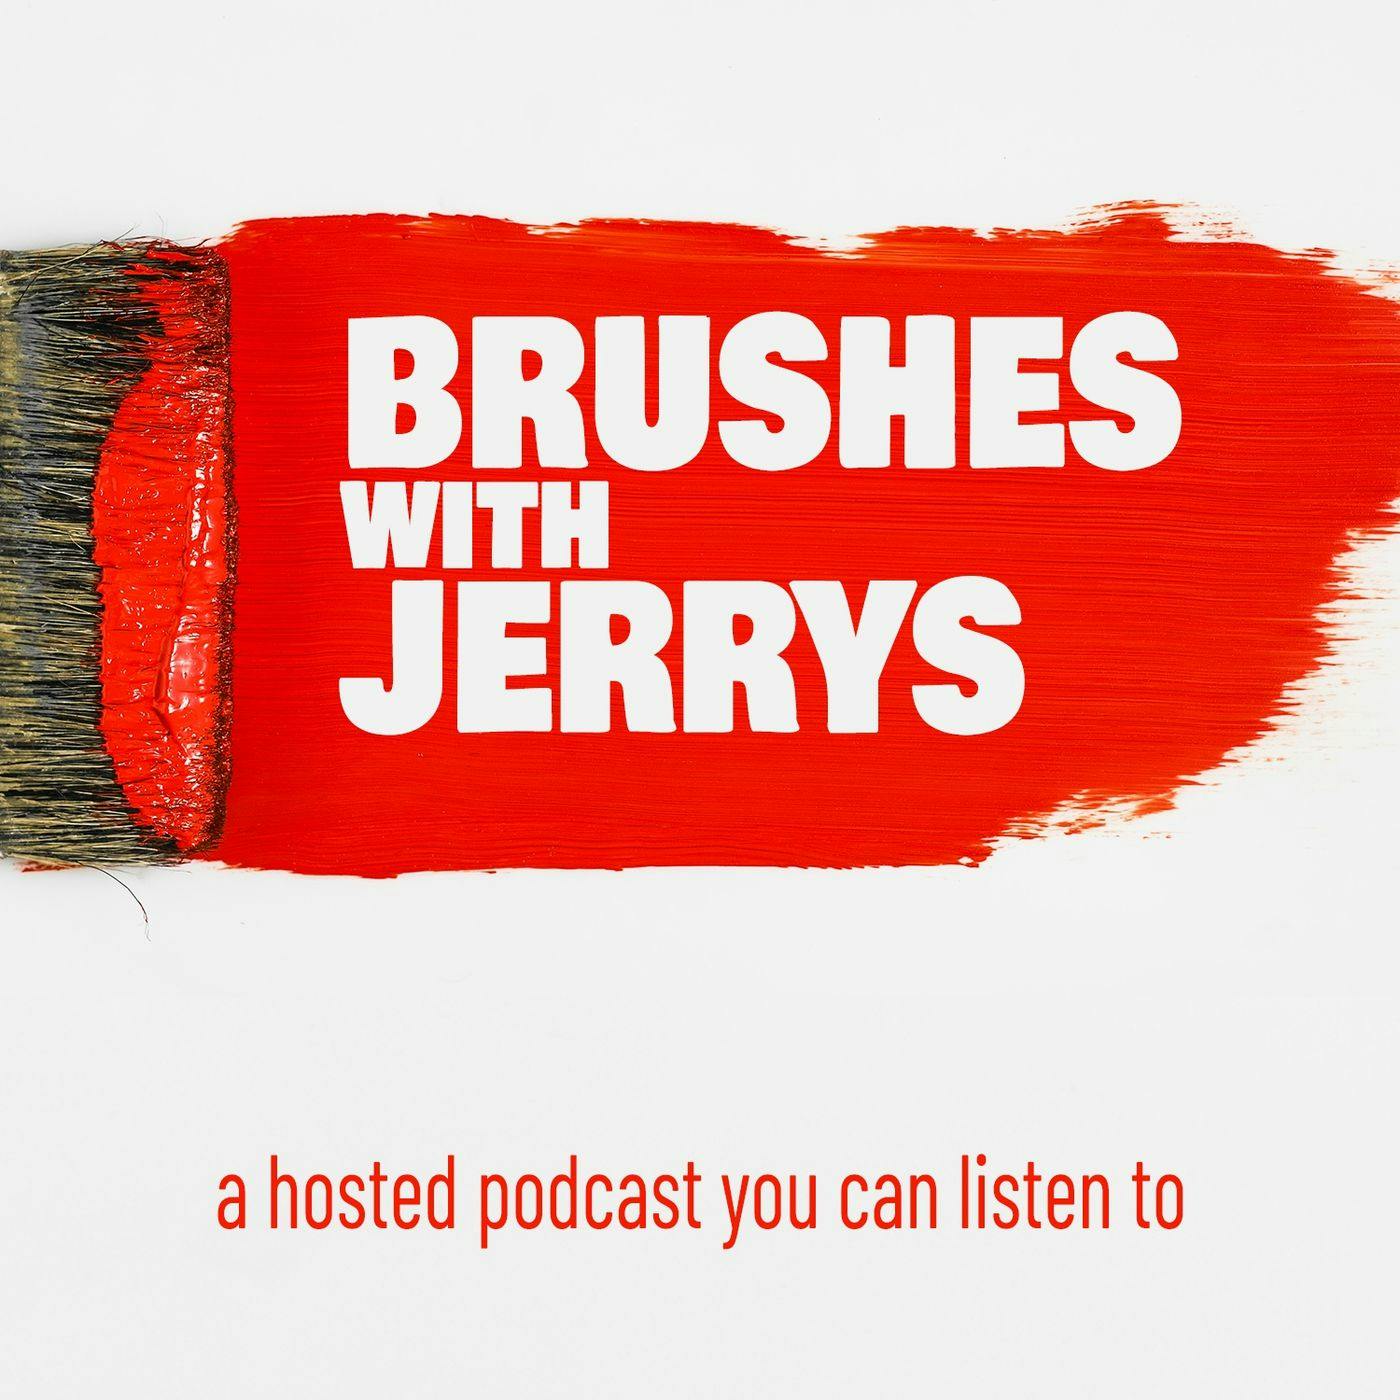 This is episode 6 of Brushes with Jerrys